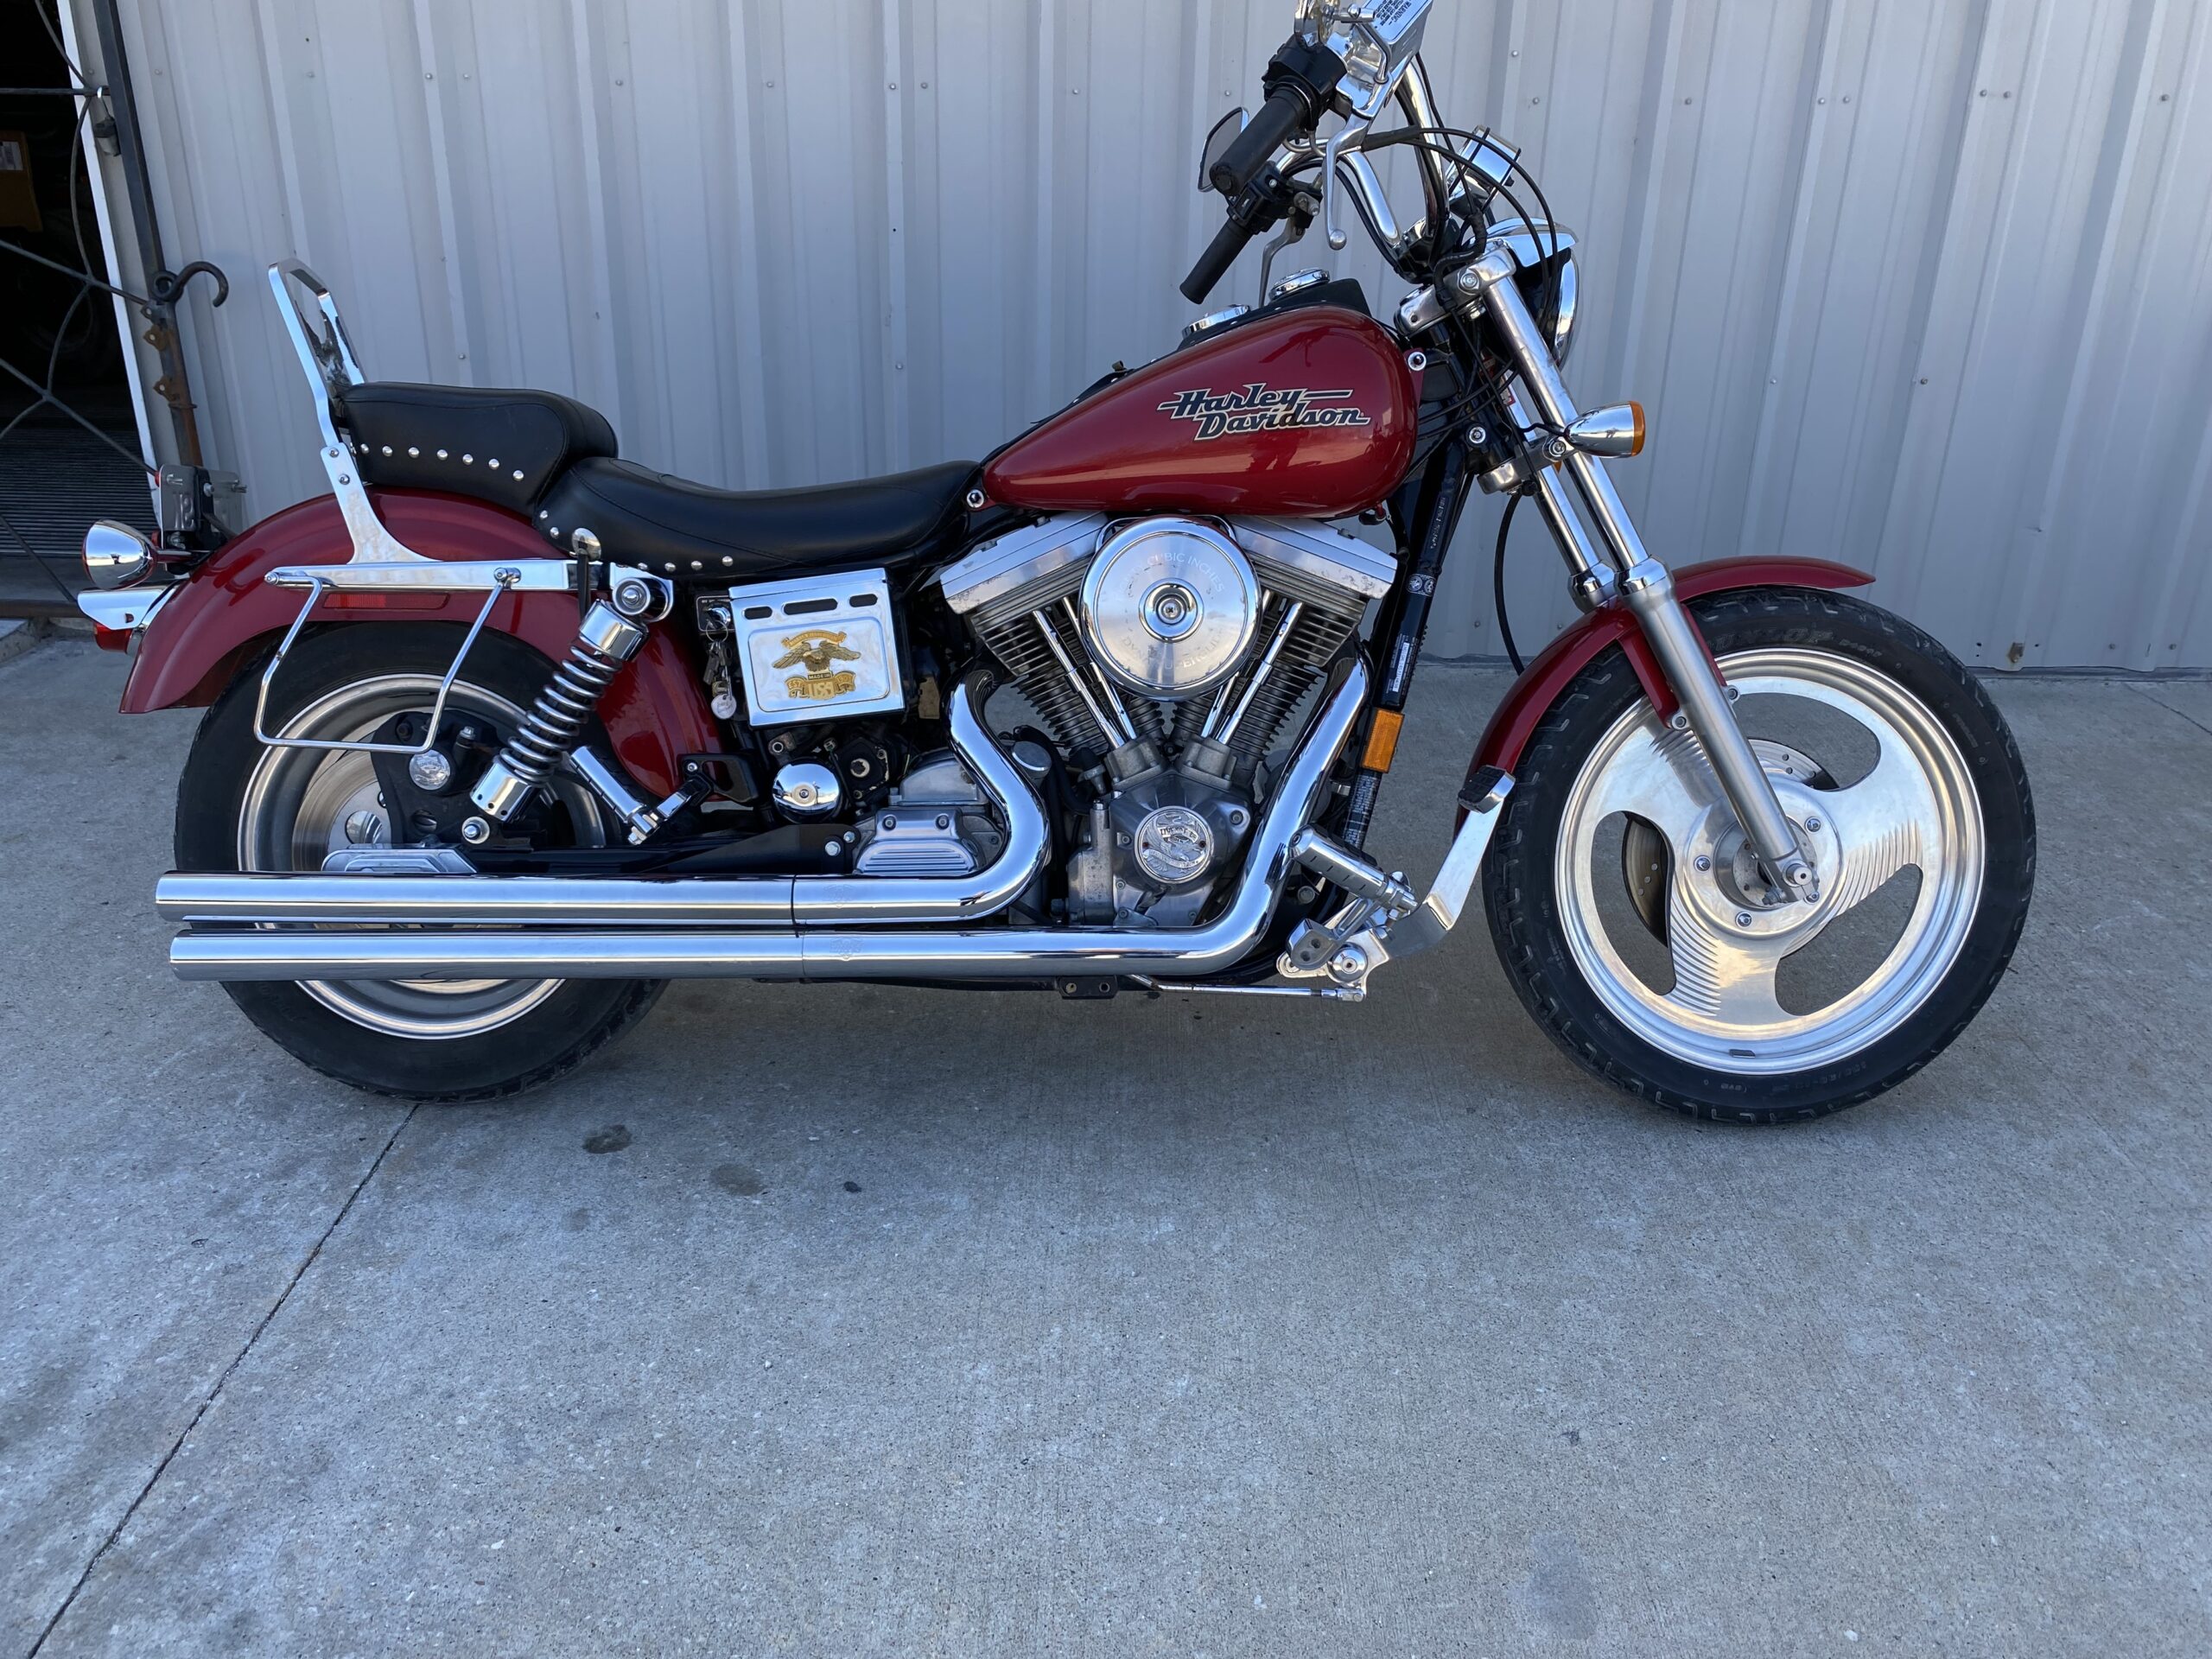 1340 ci, SOLD: 1995 Harley Davidson Dyna Super Glide 1340ci &#8211; Low Miles, Below Blue Book Price!, Knobtown Cycle